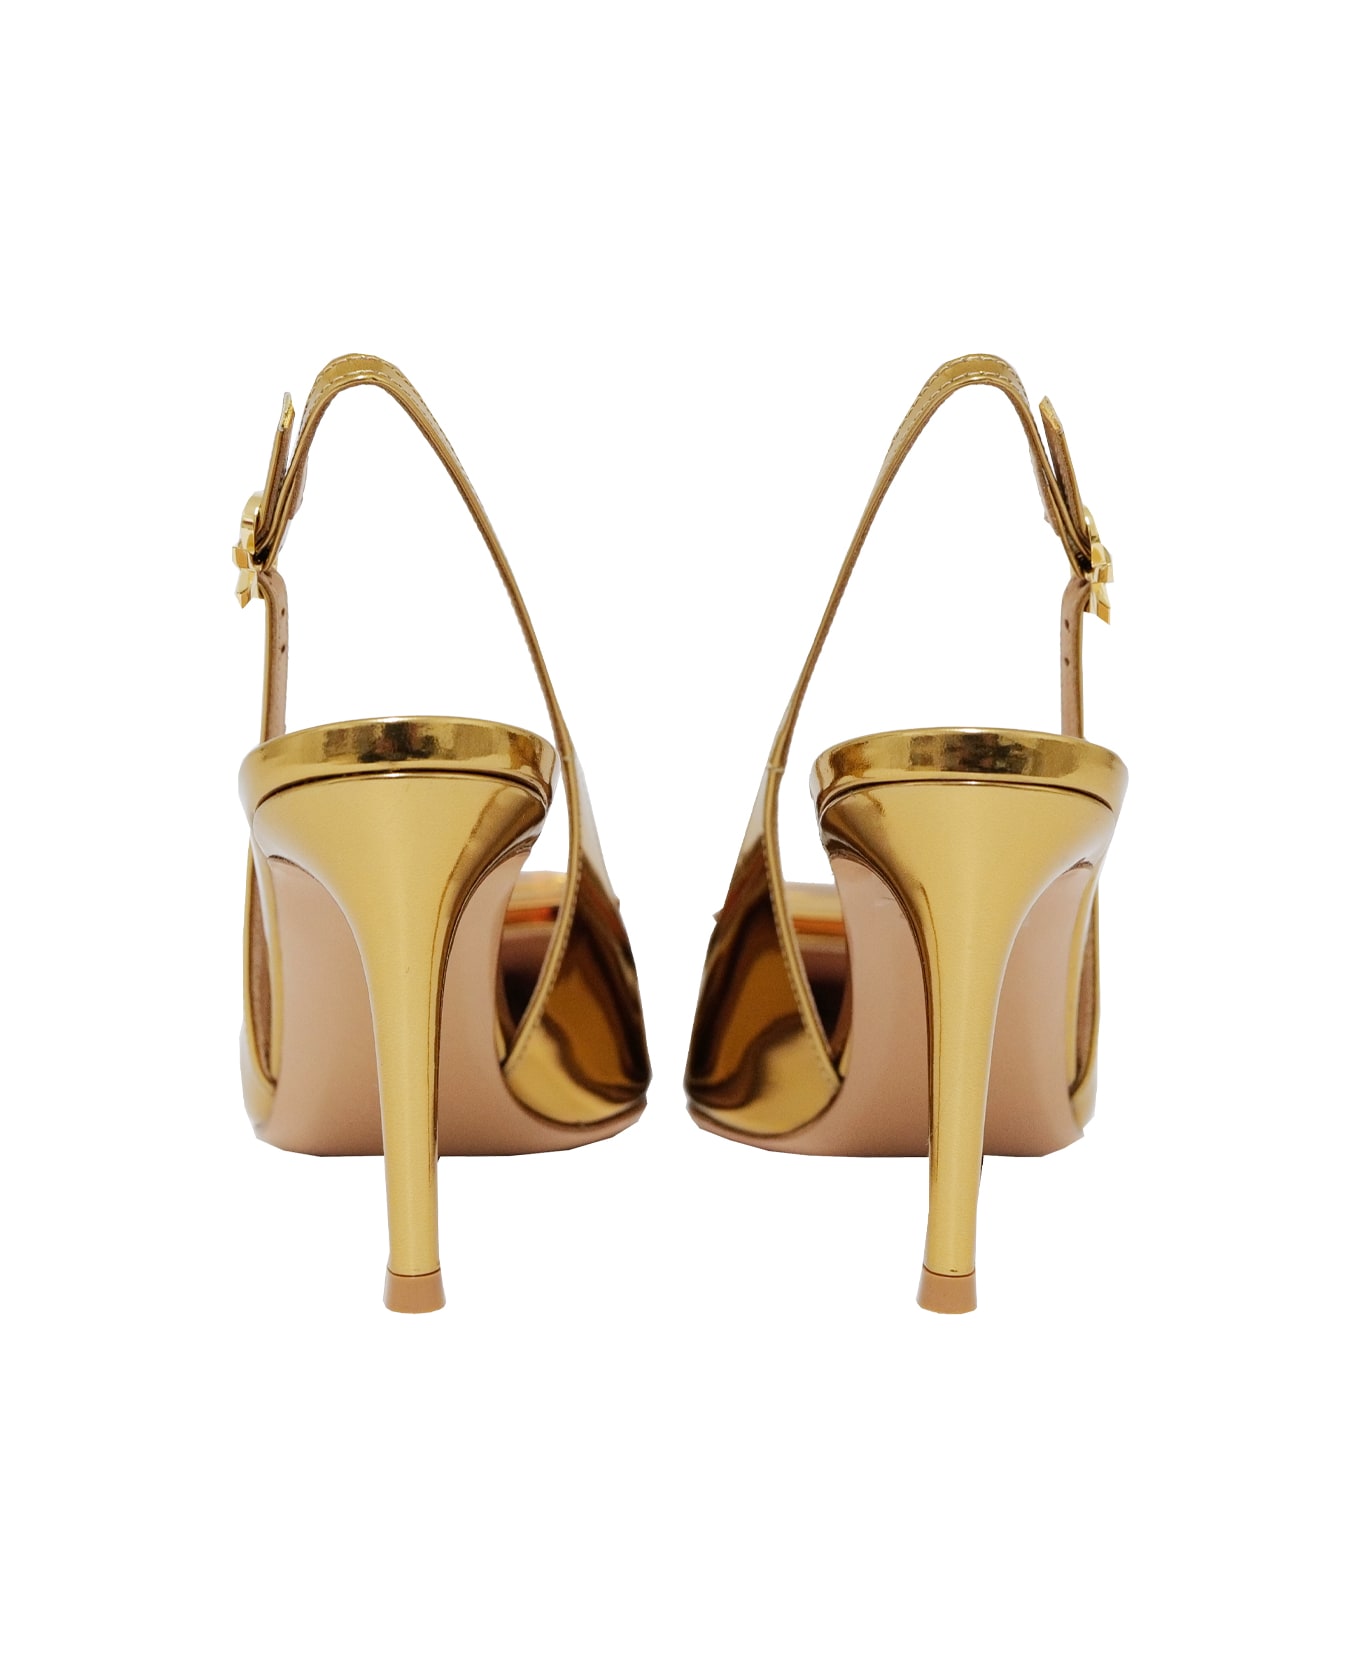 Gianvito Rossi ''jaipur Sling'' Shoes With Heels - Golden